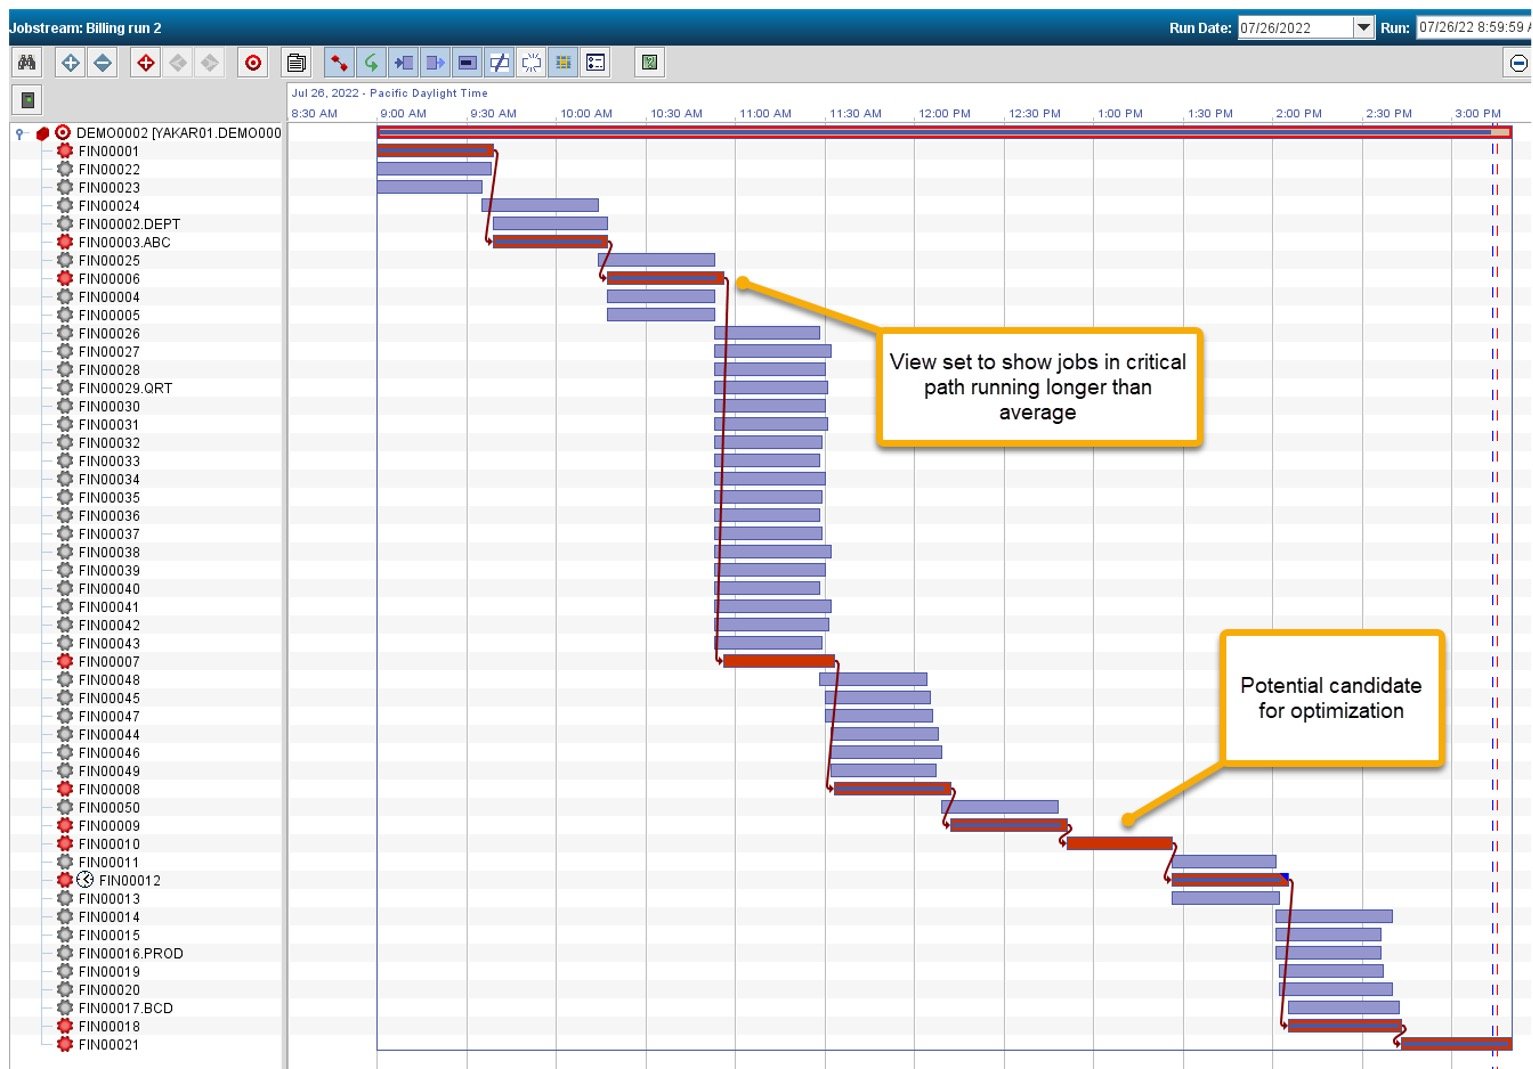 ESD_FY23_Academy-Blog.Automic Automation Intelligence - Gain Insights to Boost Workload Throughput.Figure 3